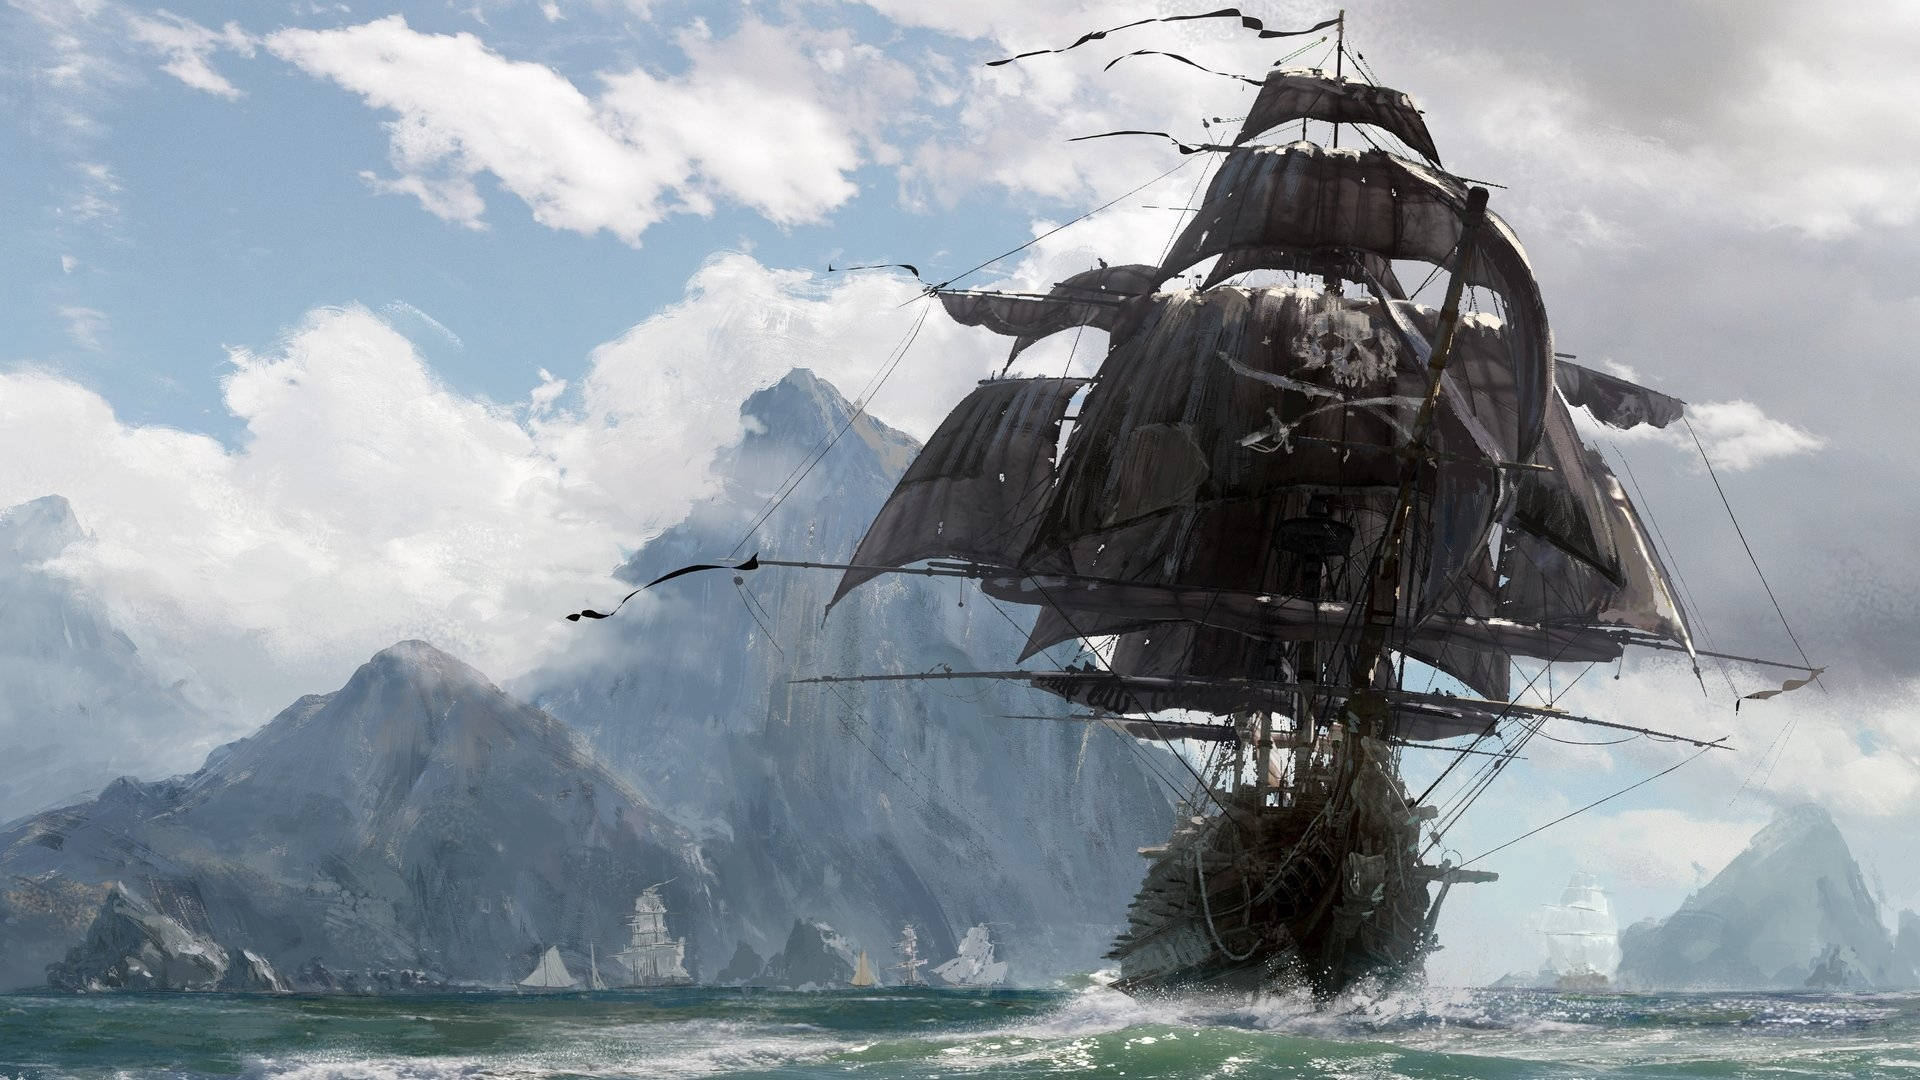 200+] Pirate Ship Pictures